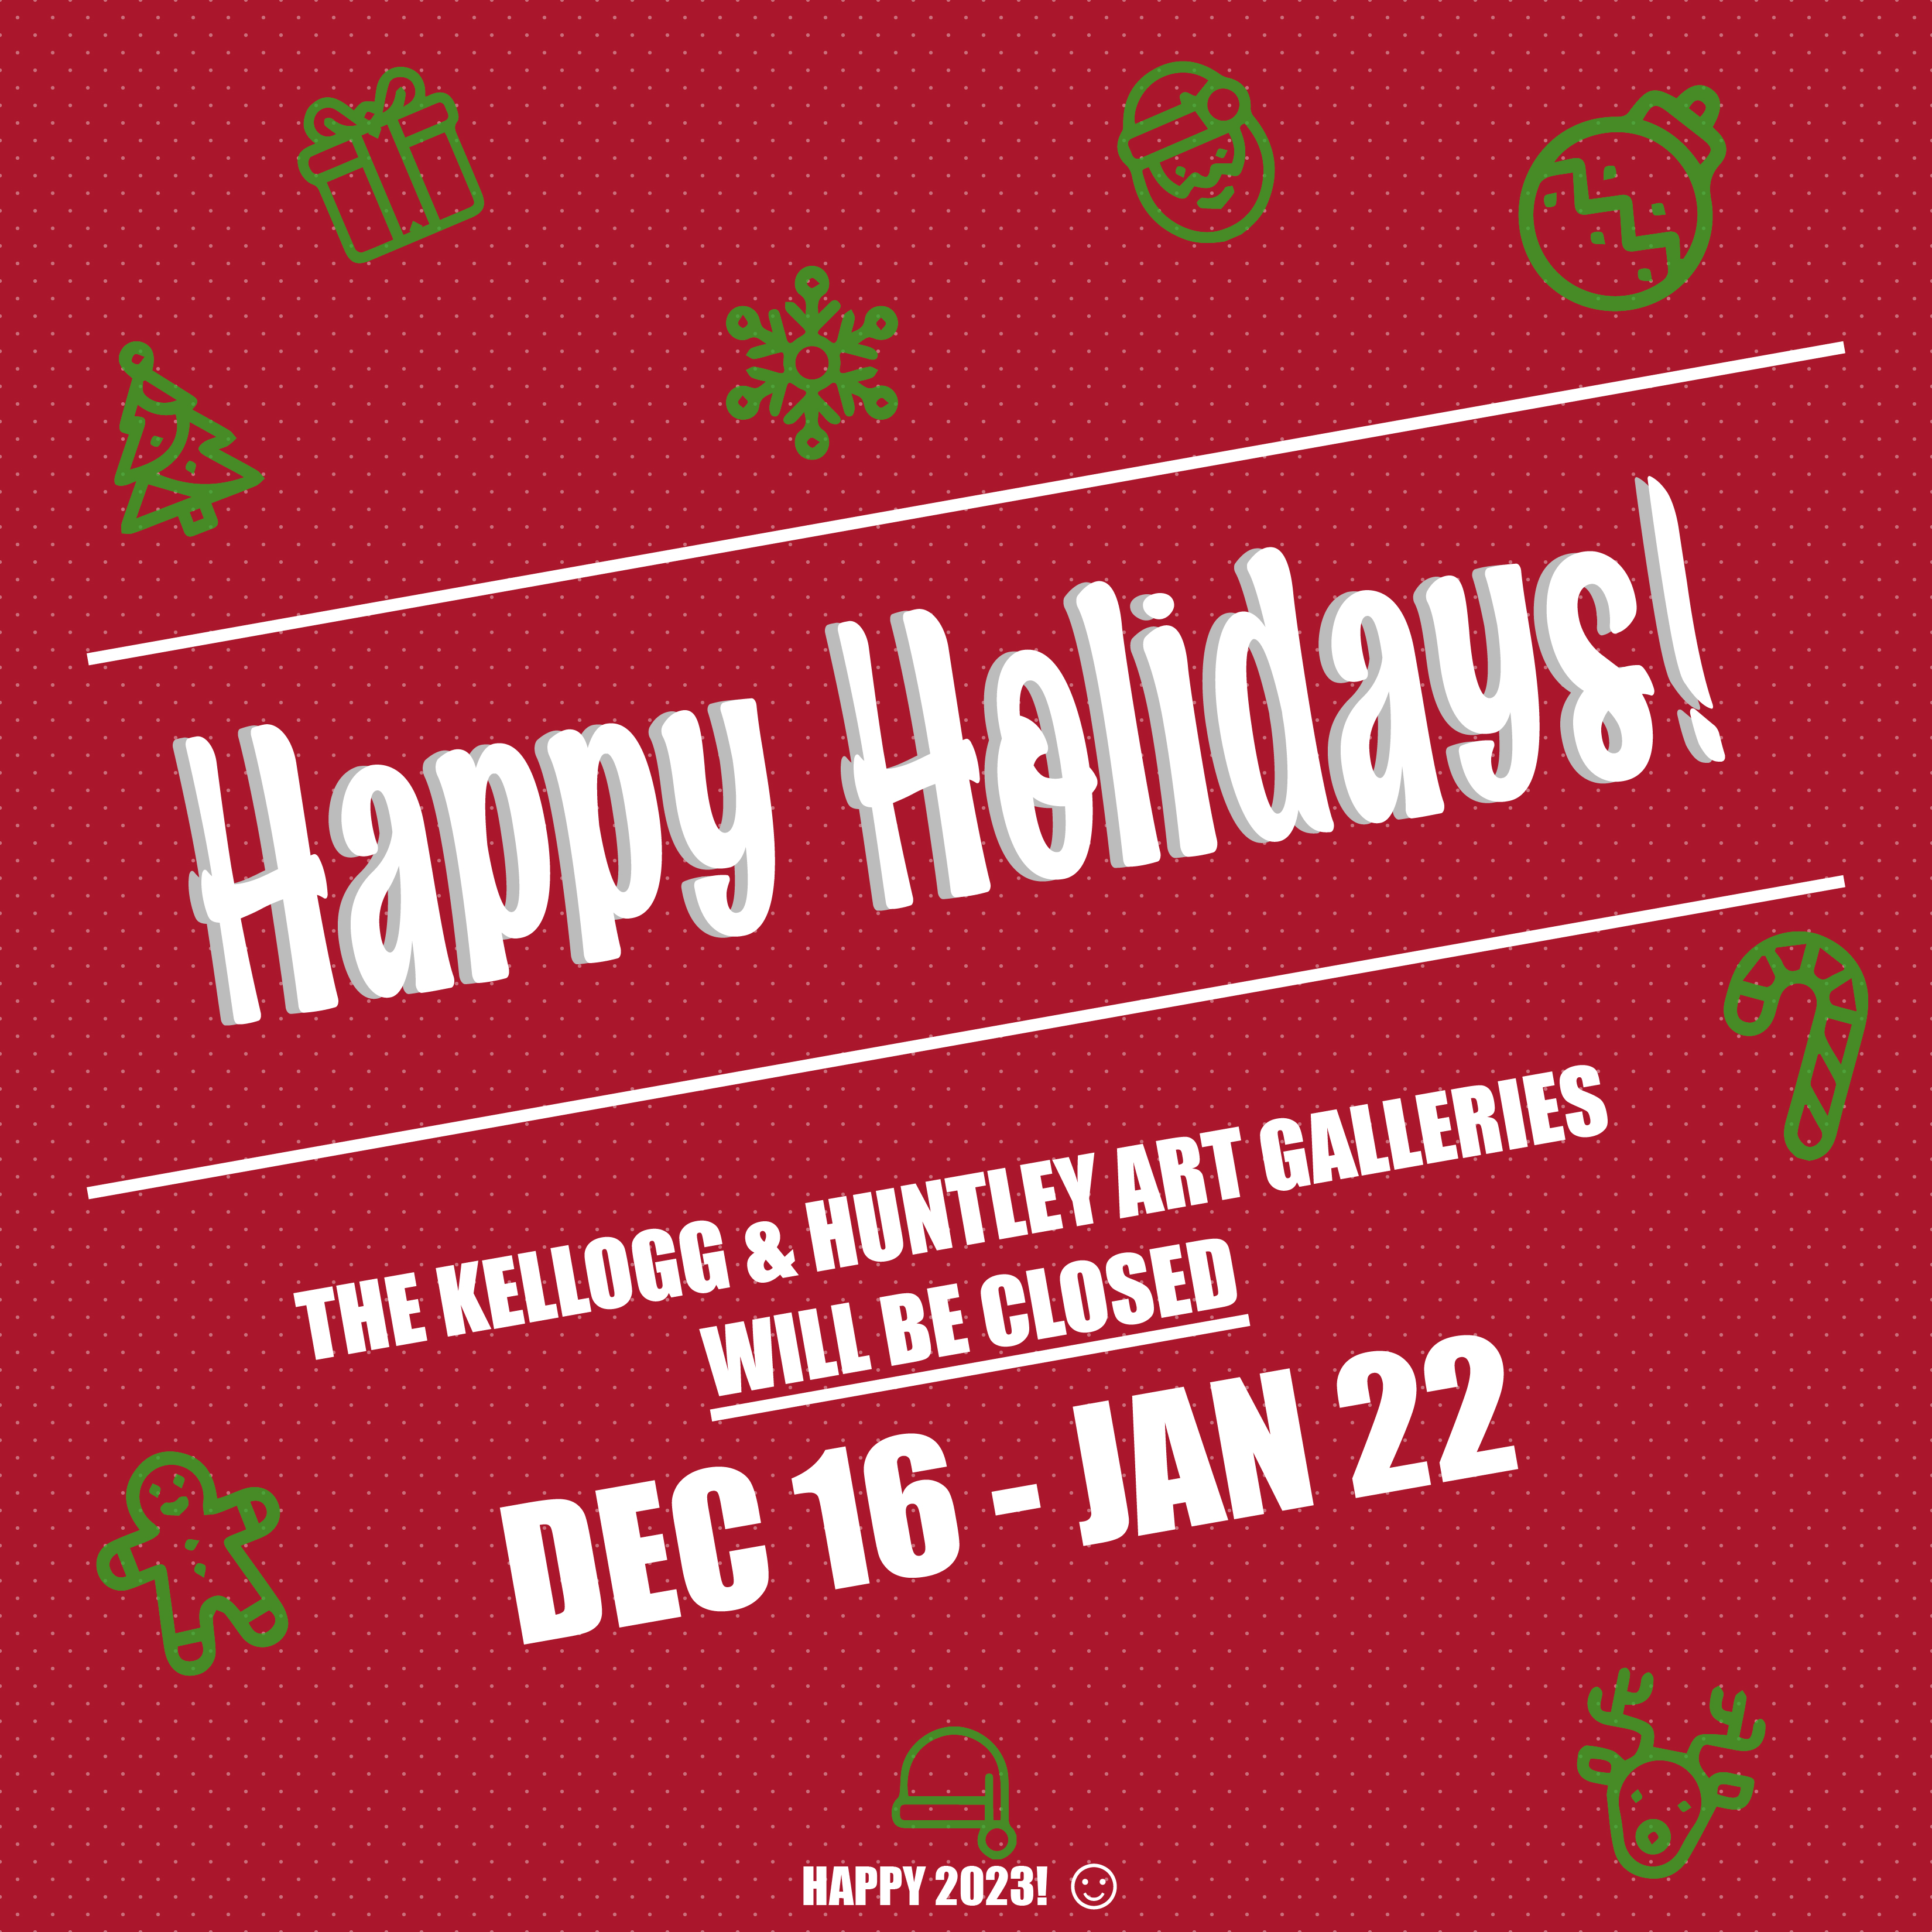 Red, white, and green holiday graphic stating "Happy Holidays! The Kellogg & Huntley Art Galleries will be closed Dec 16 - Jan 22"